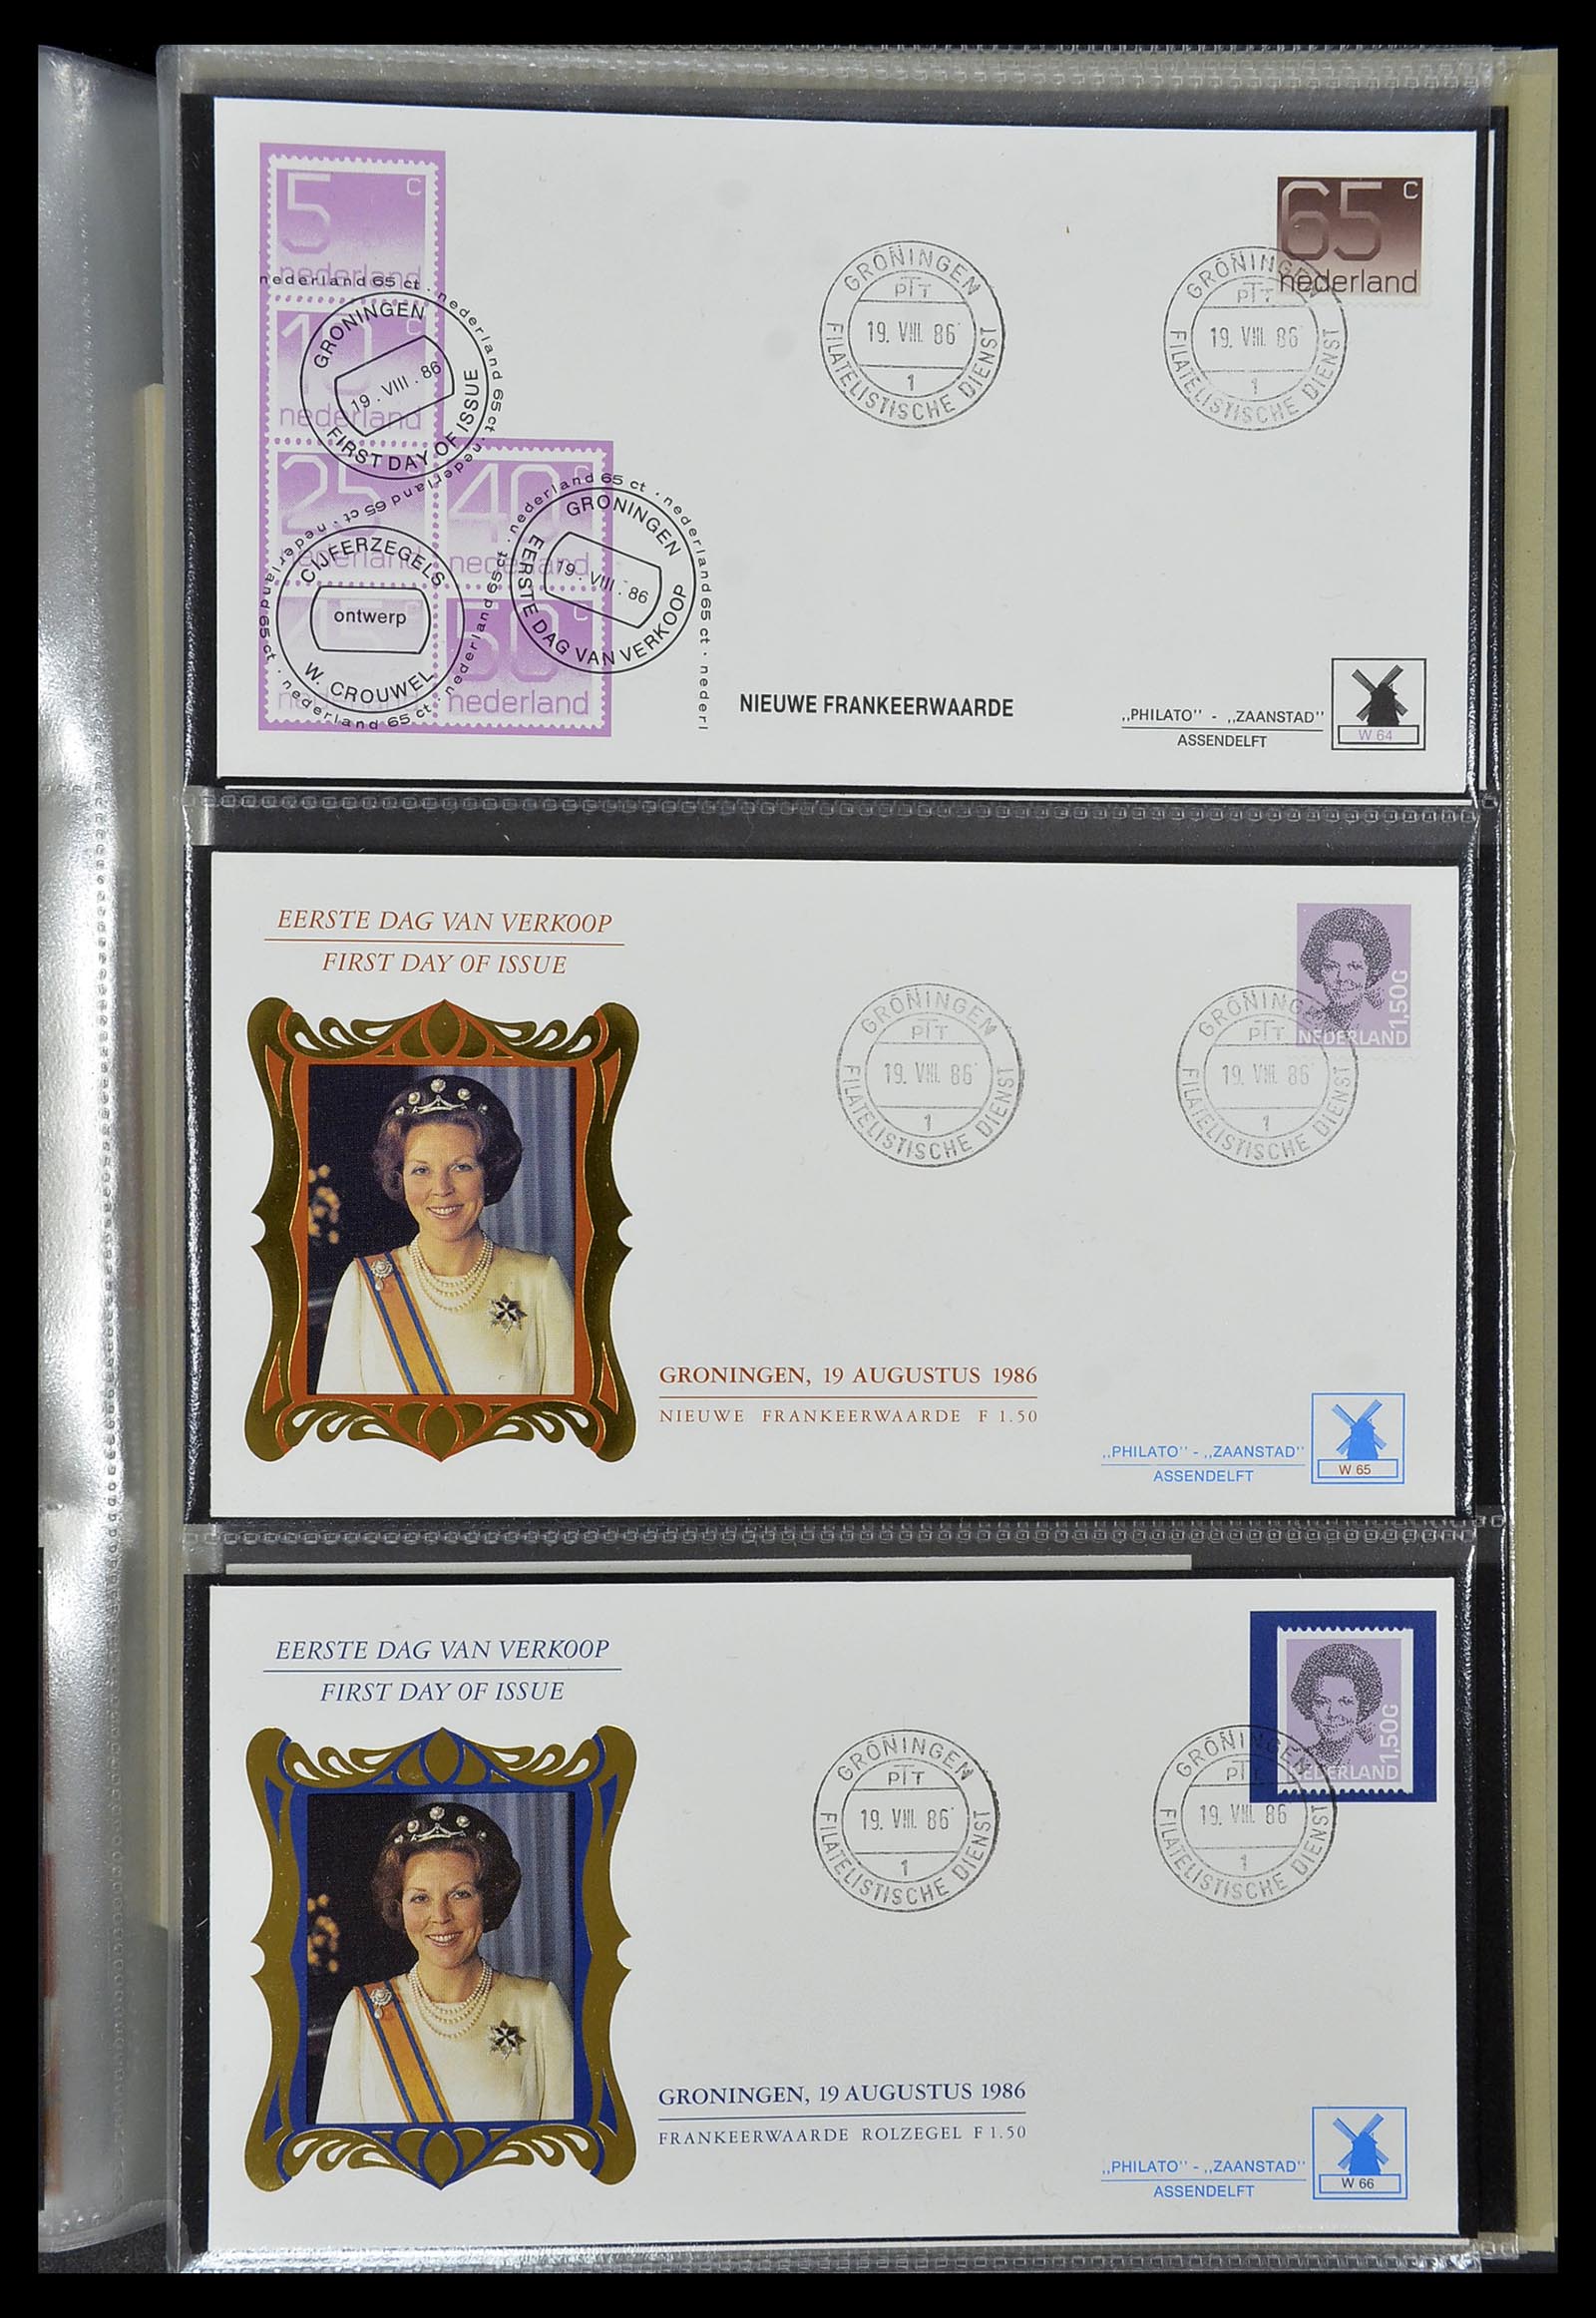 29666 172 - 29666 Netherlands 1997-2011 FDC's.